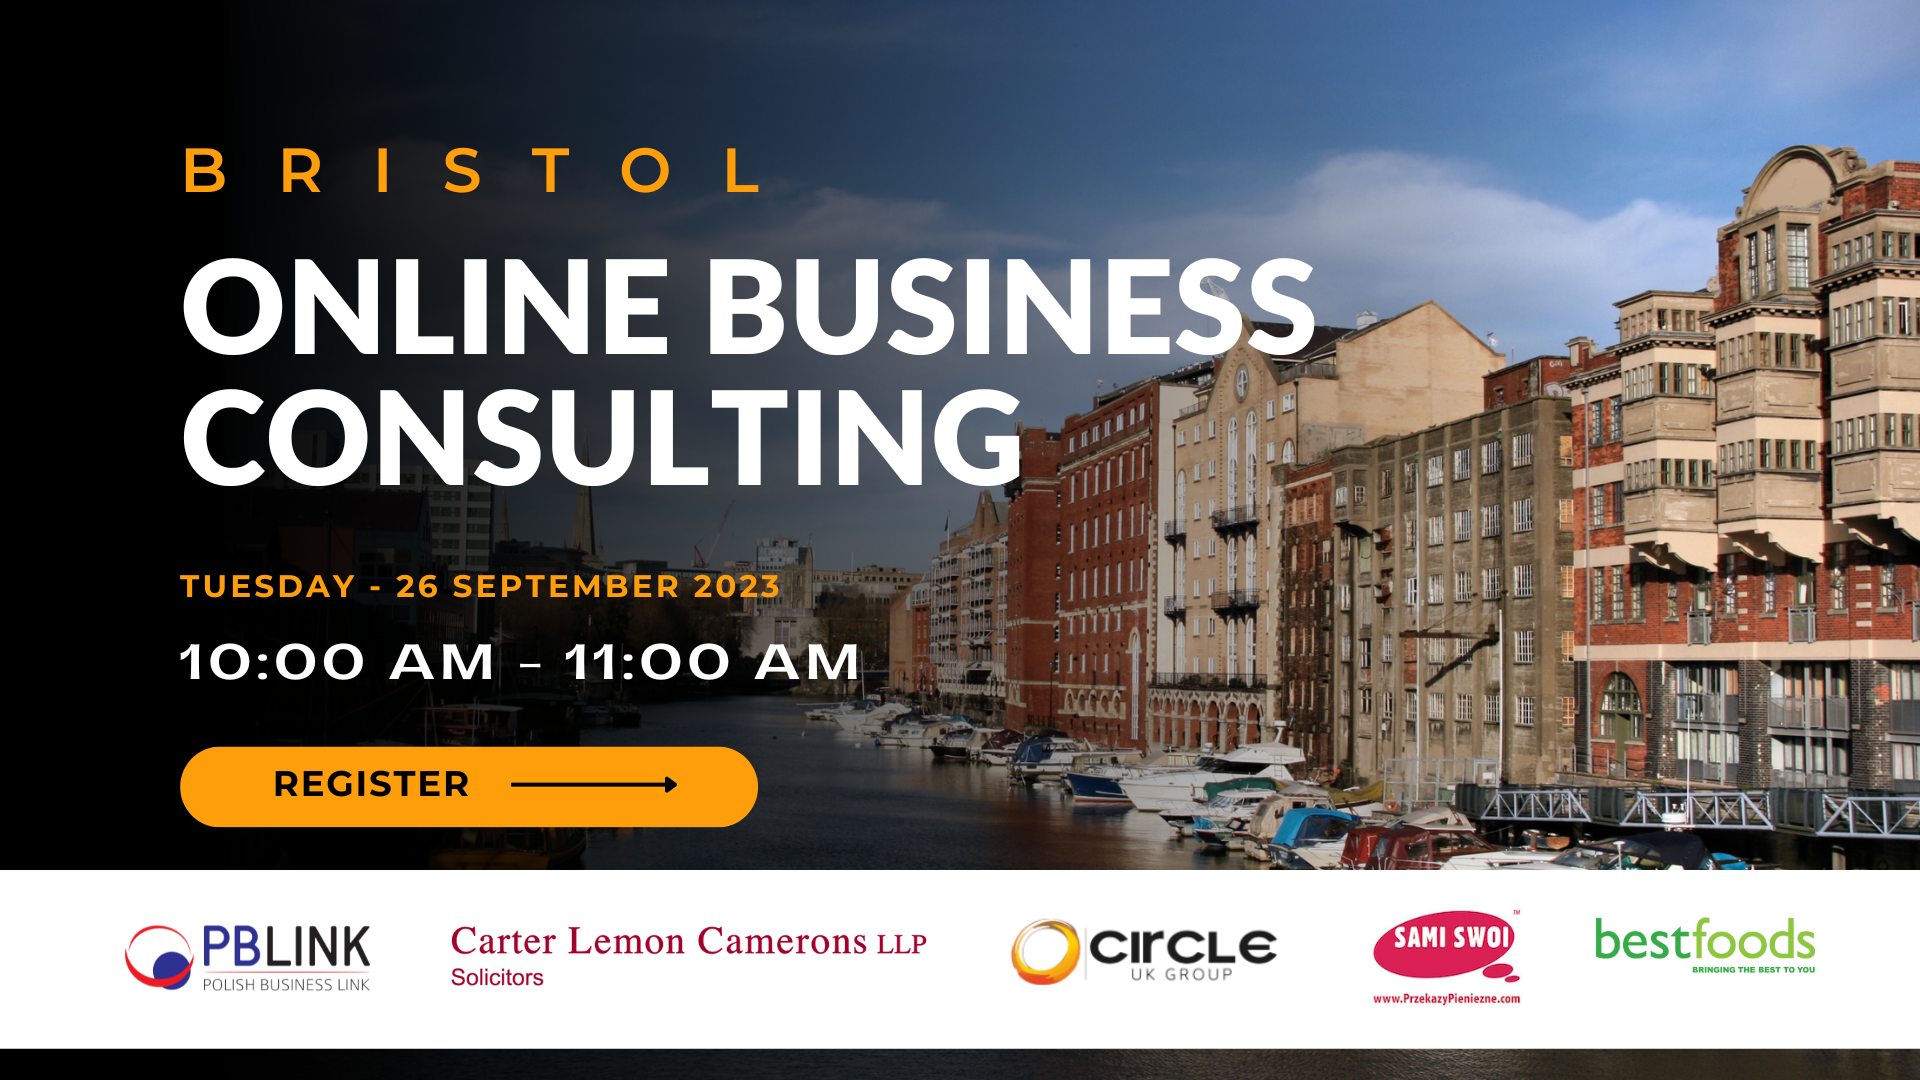 Online Business Consulting Bristol